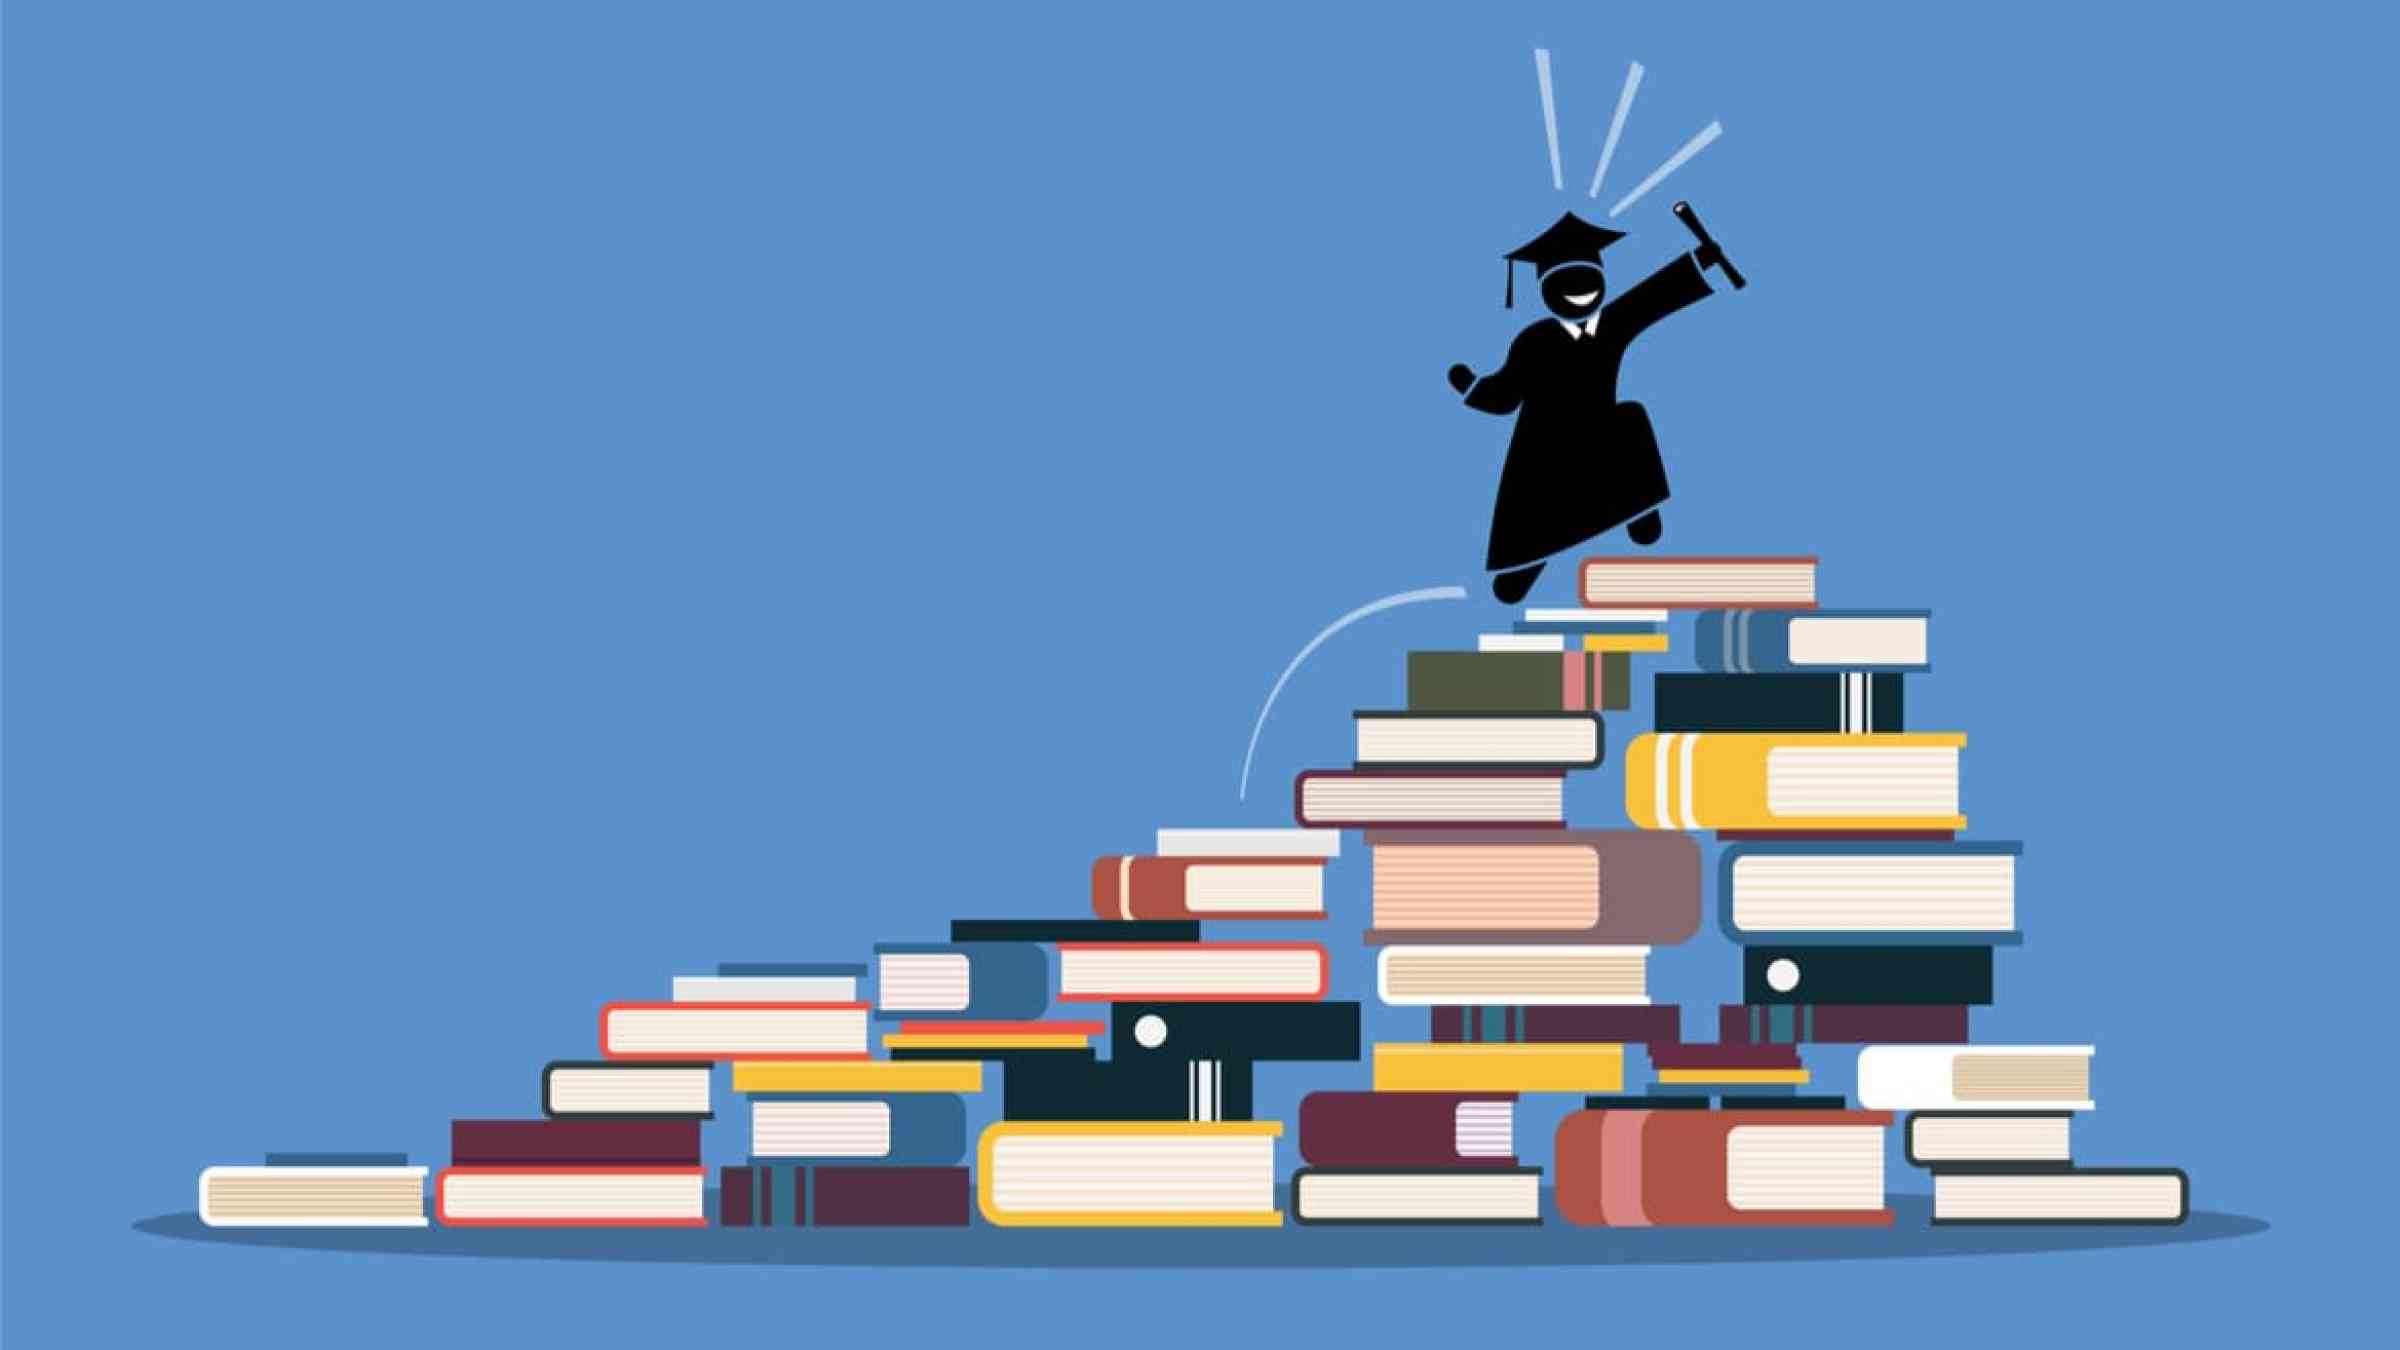 Illustration depicting a student walking a stair of books